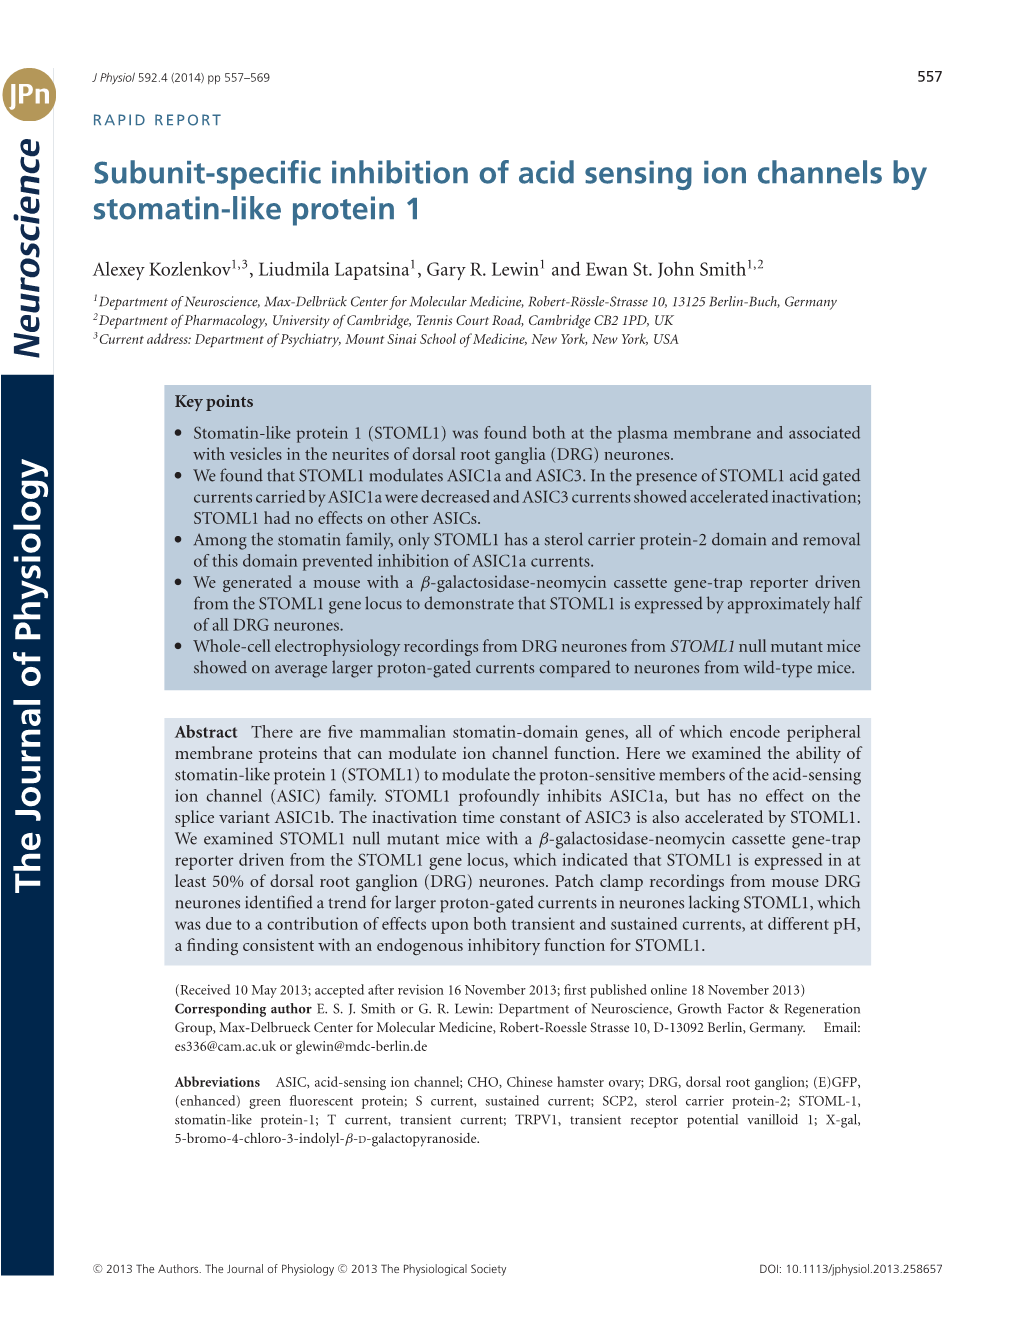 Subunitspecific Inhibition of Acid Sensing Ion Channels by Stomatinlike Protein 1